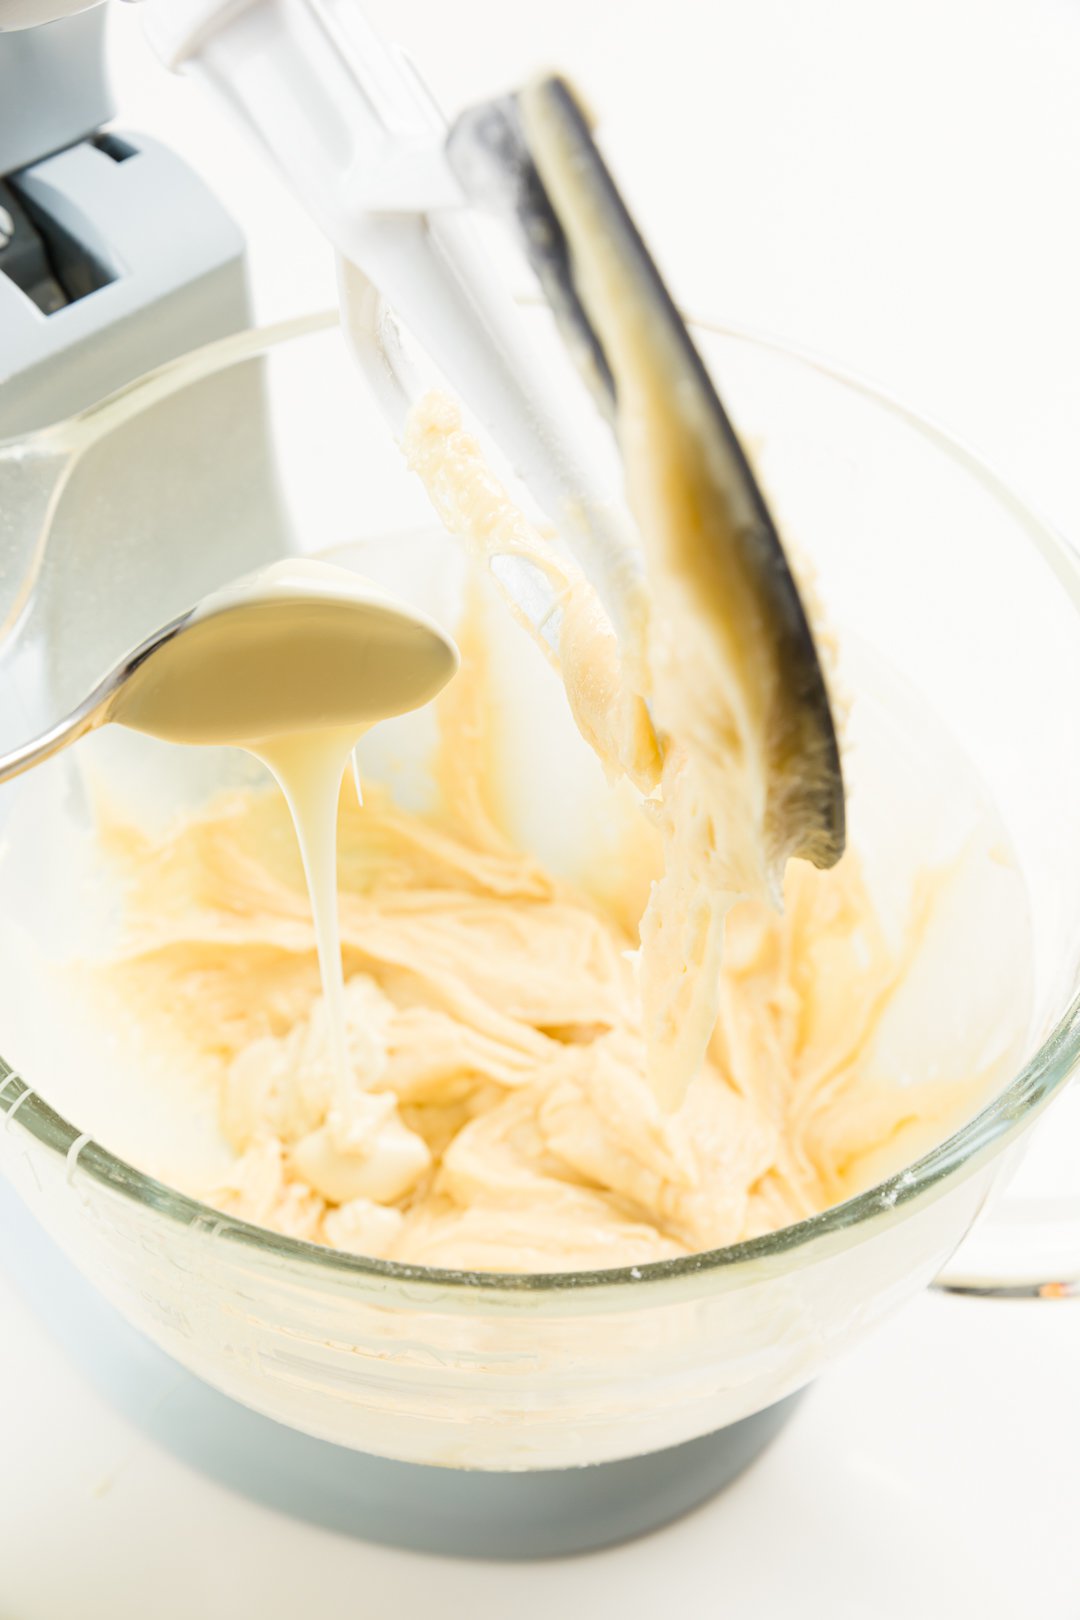 Adding melted white chocolate to batter